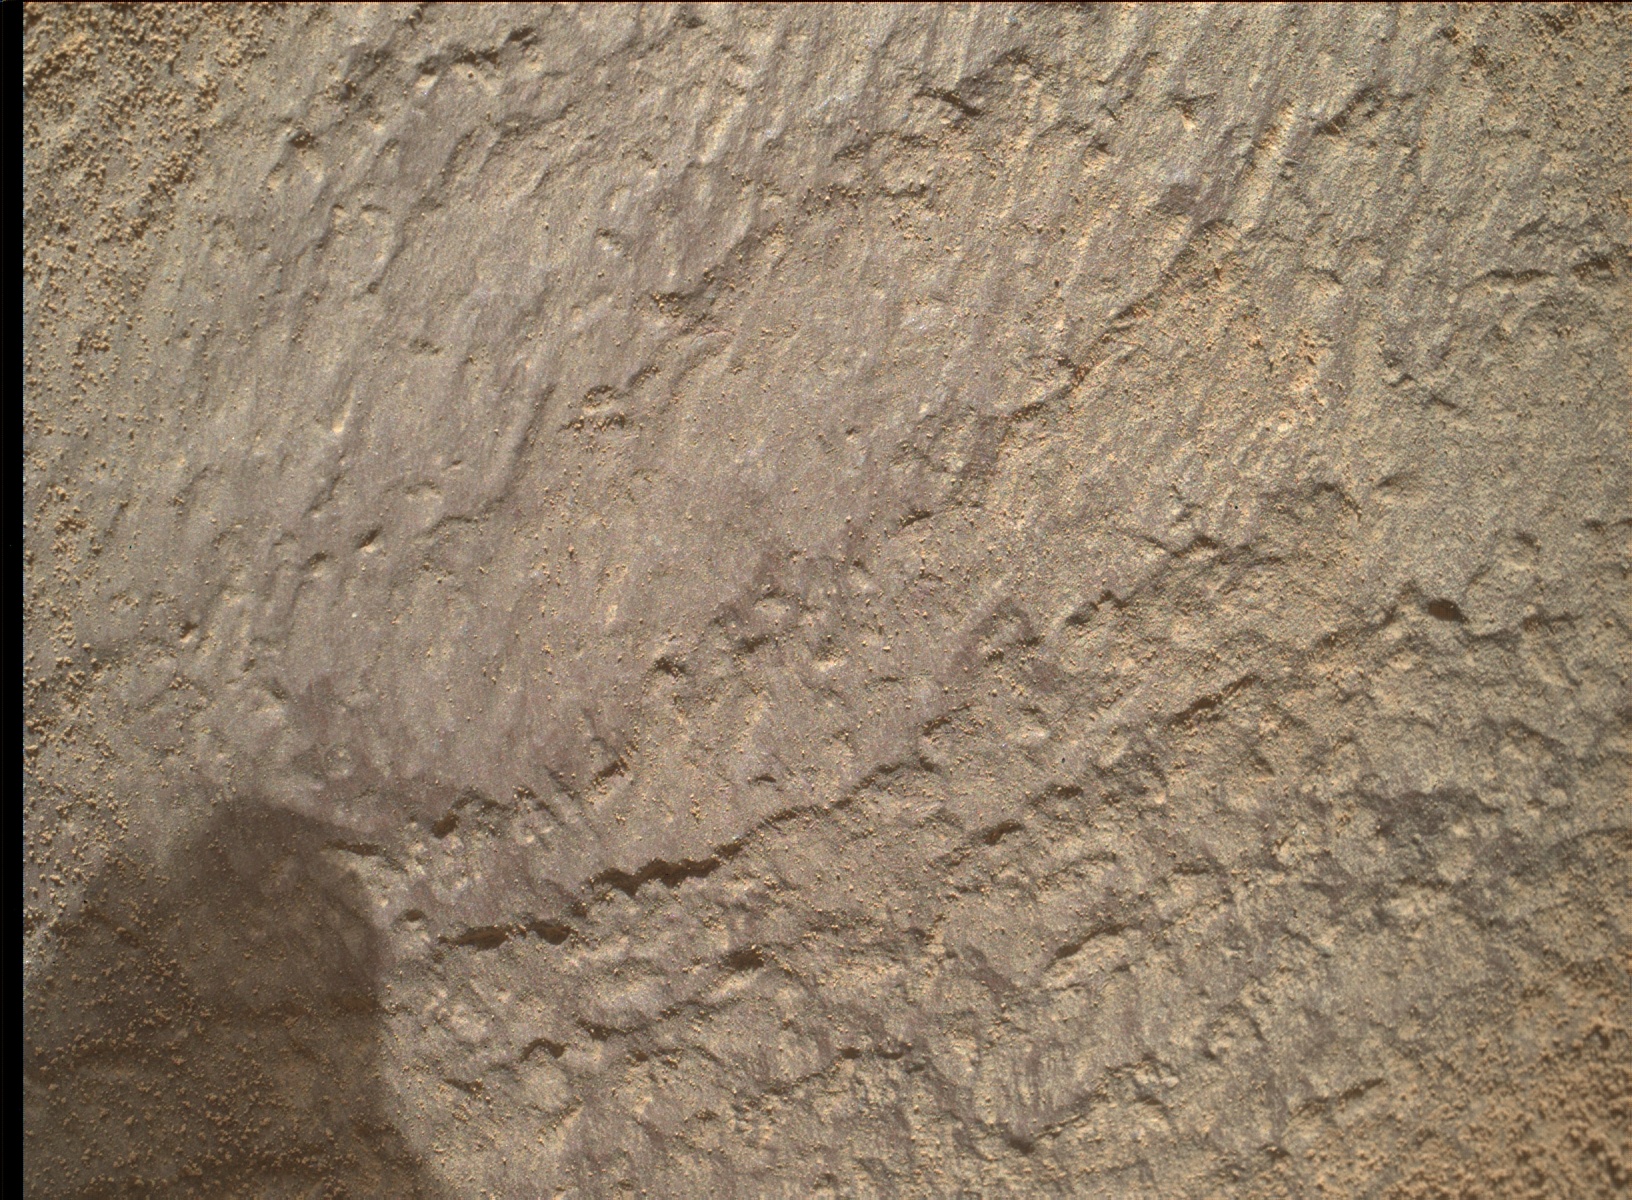 Nasa's Mars rover Curiosity acquired this image using its Mars Hand Lens Imager (MAHLI) on Sol 1166